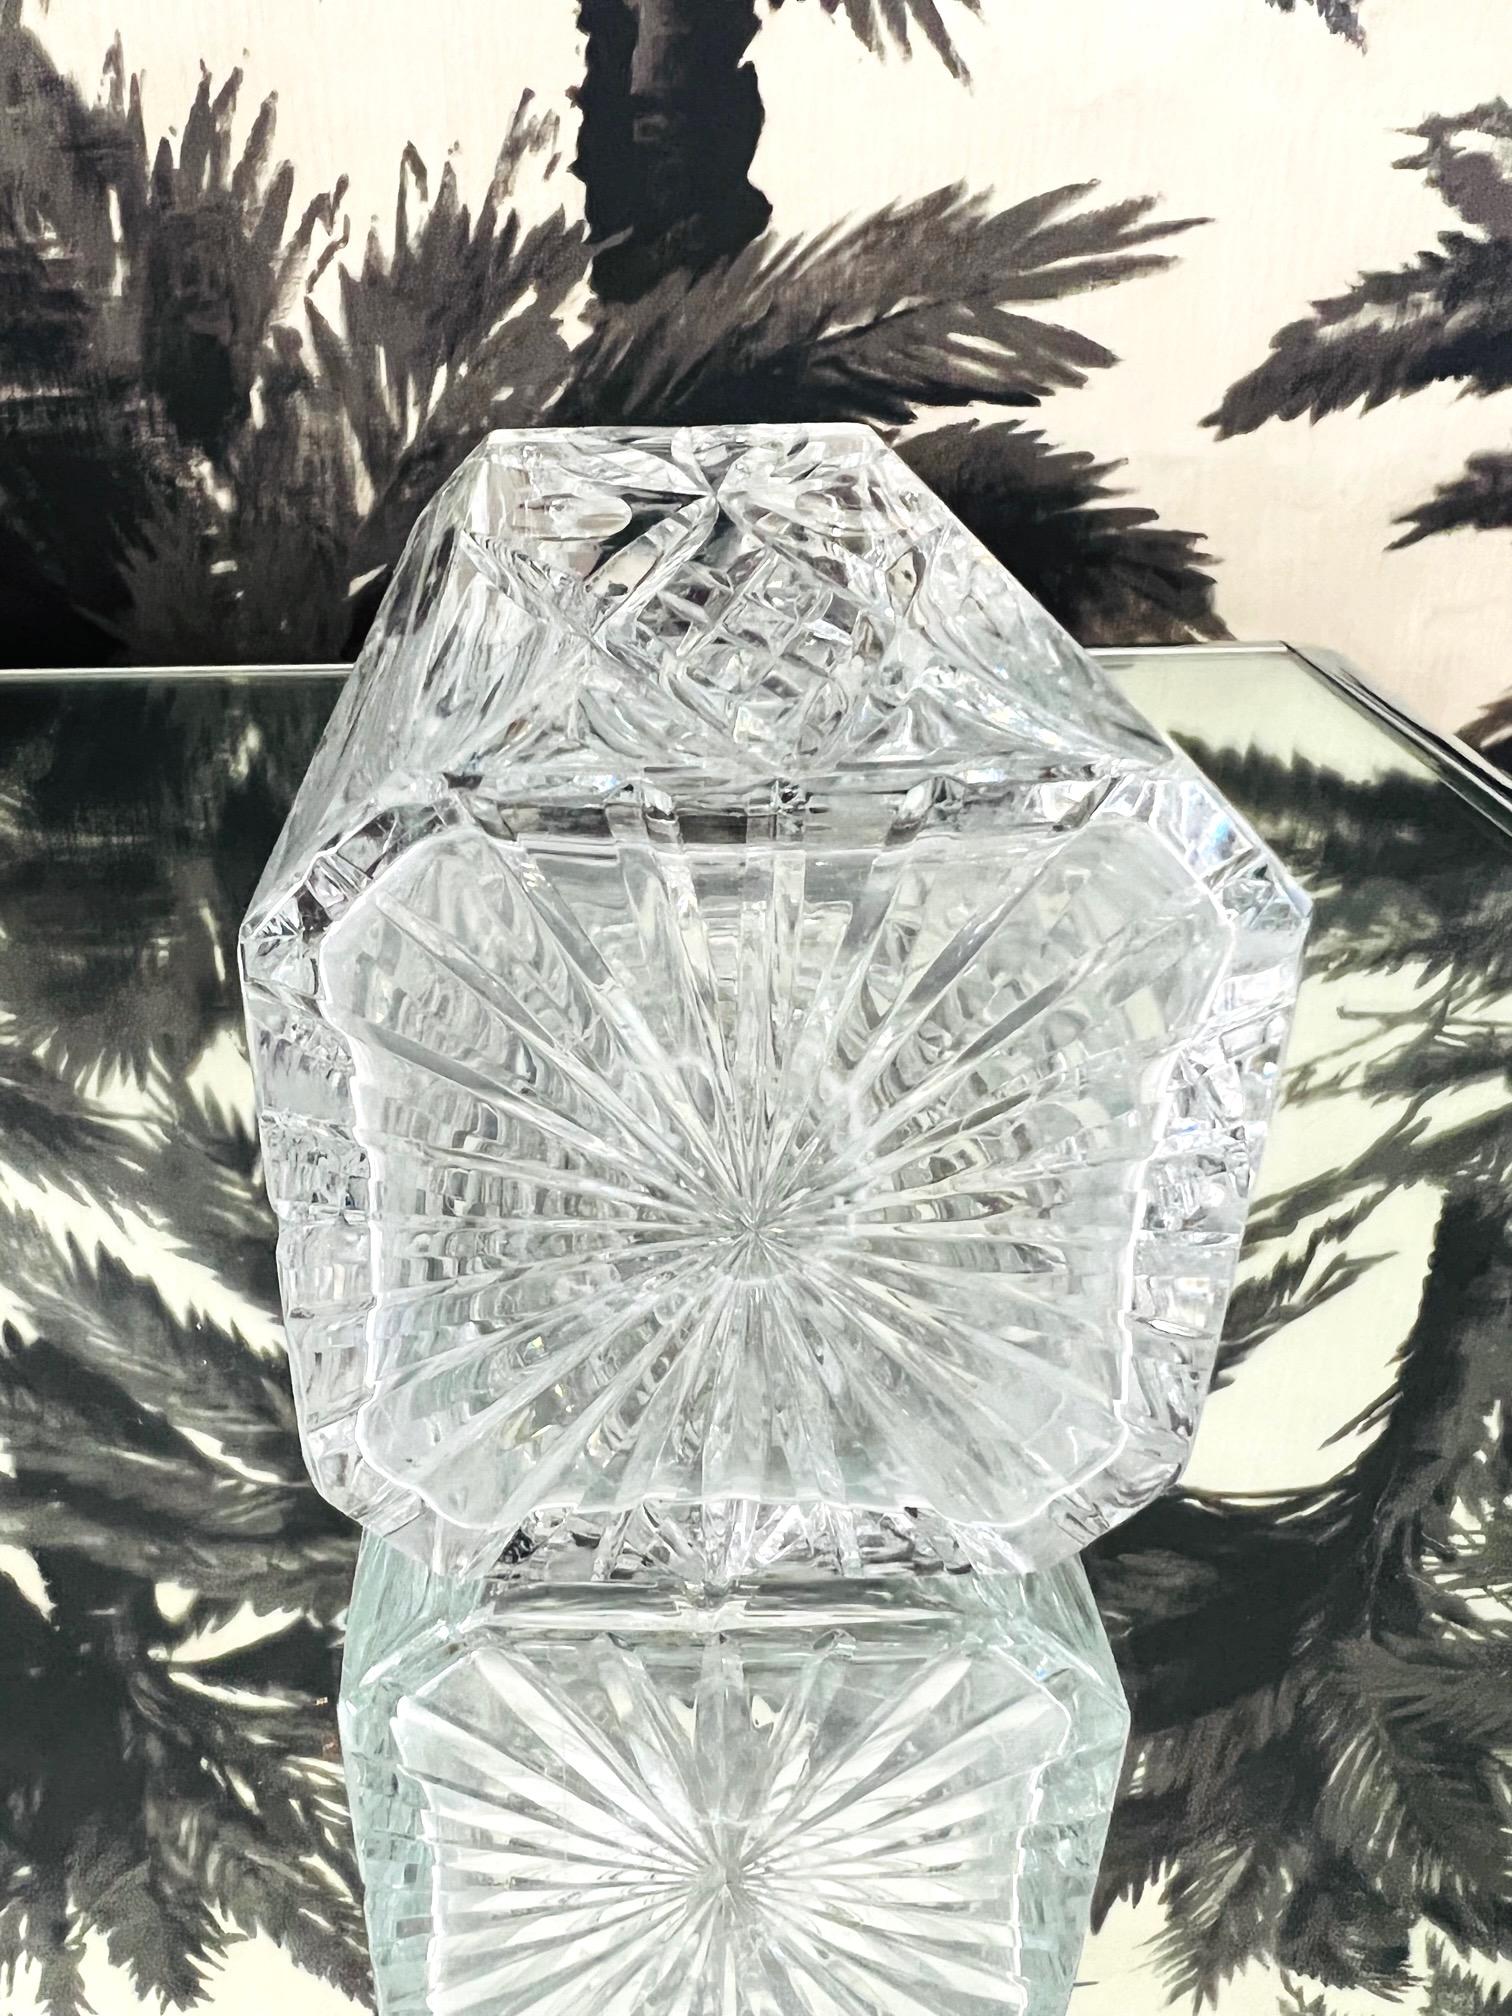 Vintage Waterford Crystal Whiskey Decanter with Etched Designs, C. 1980 1